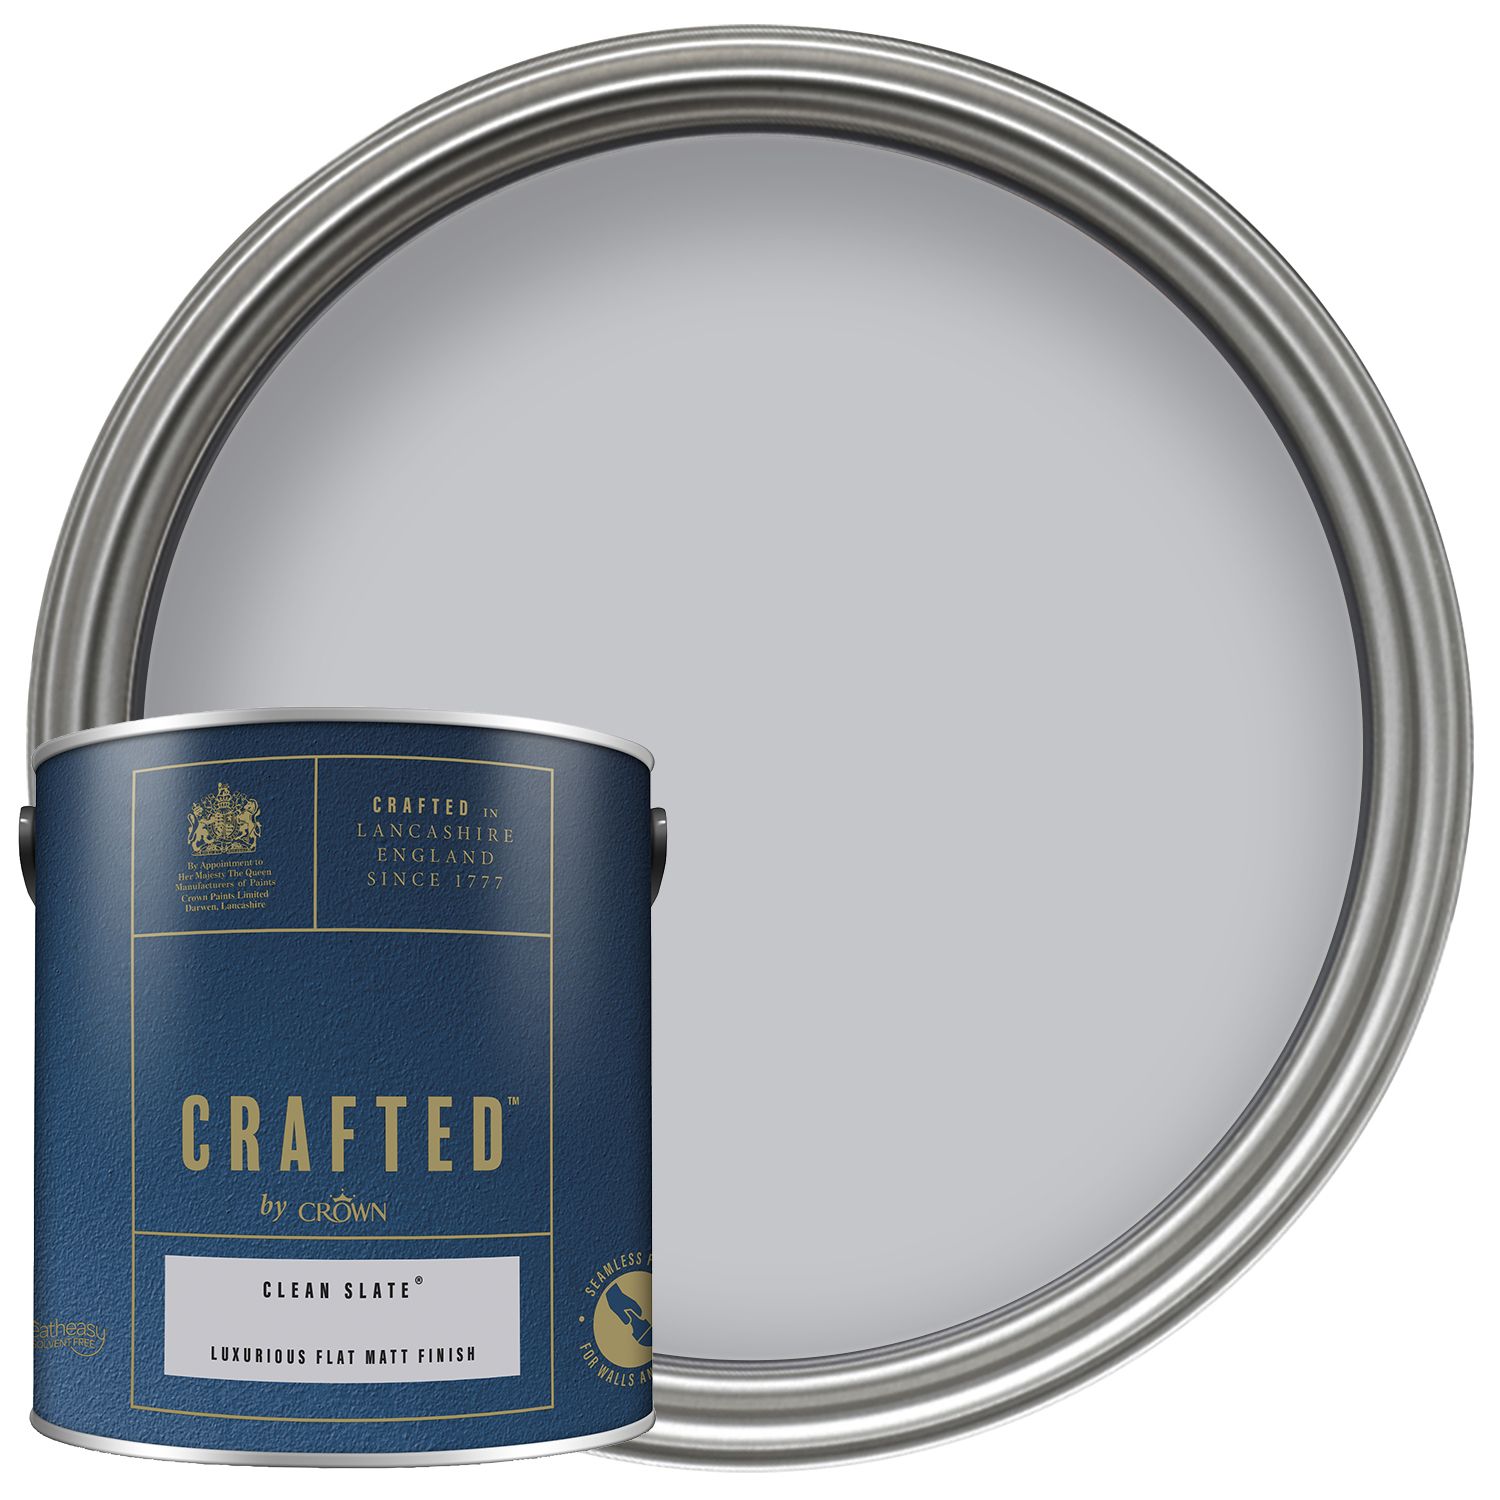 Image of CRAFTED™ by Crown Flat Matt Emulsion Interior Paint - Clean Slate™ - 2.5L